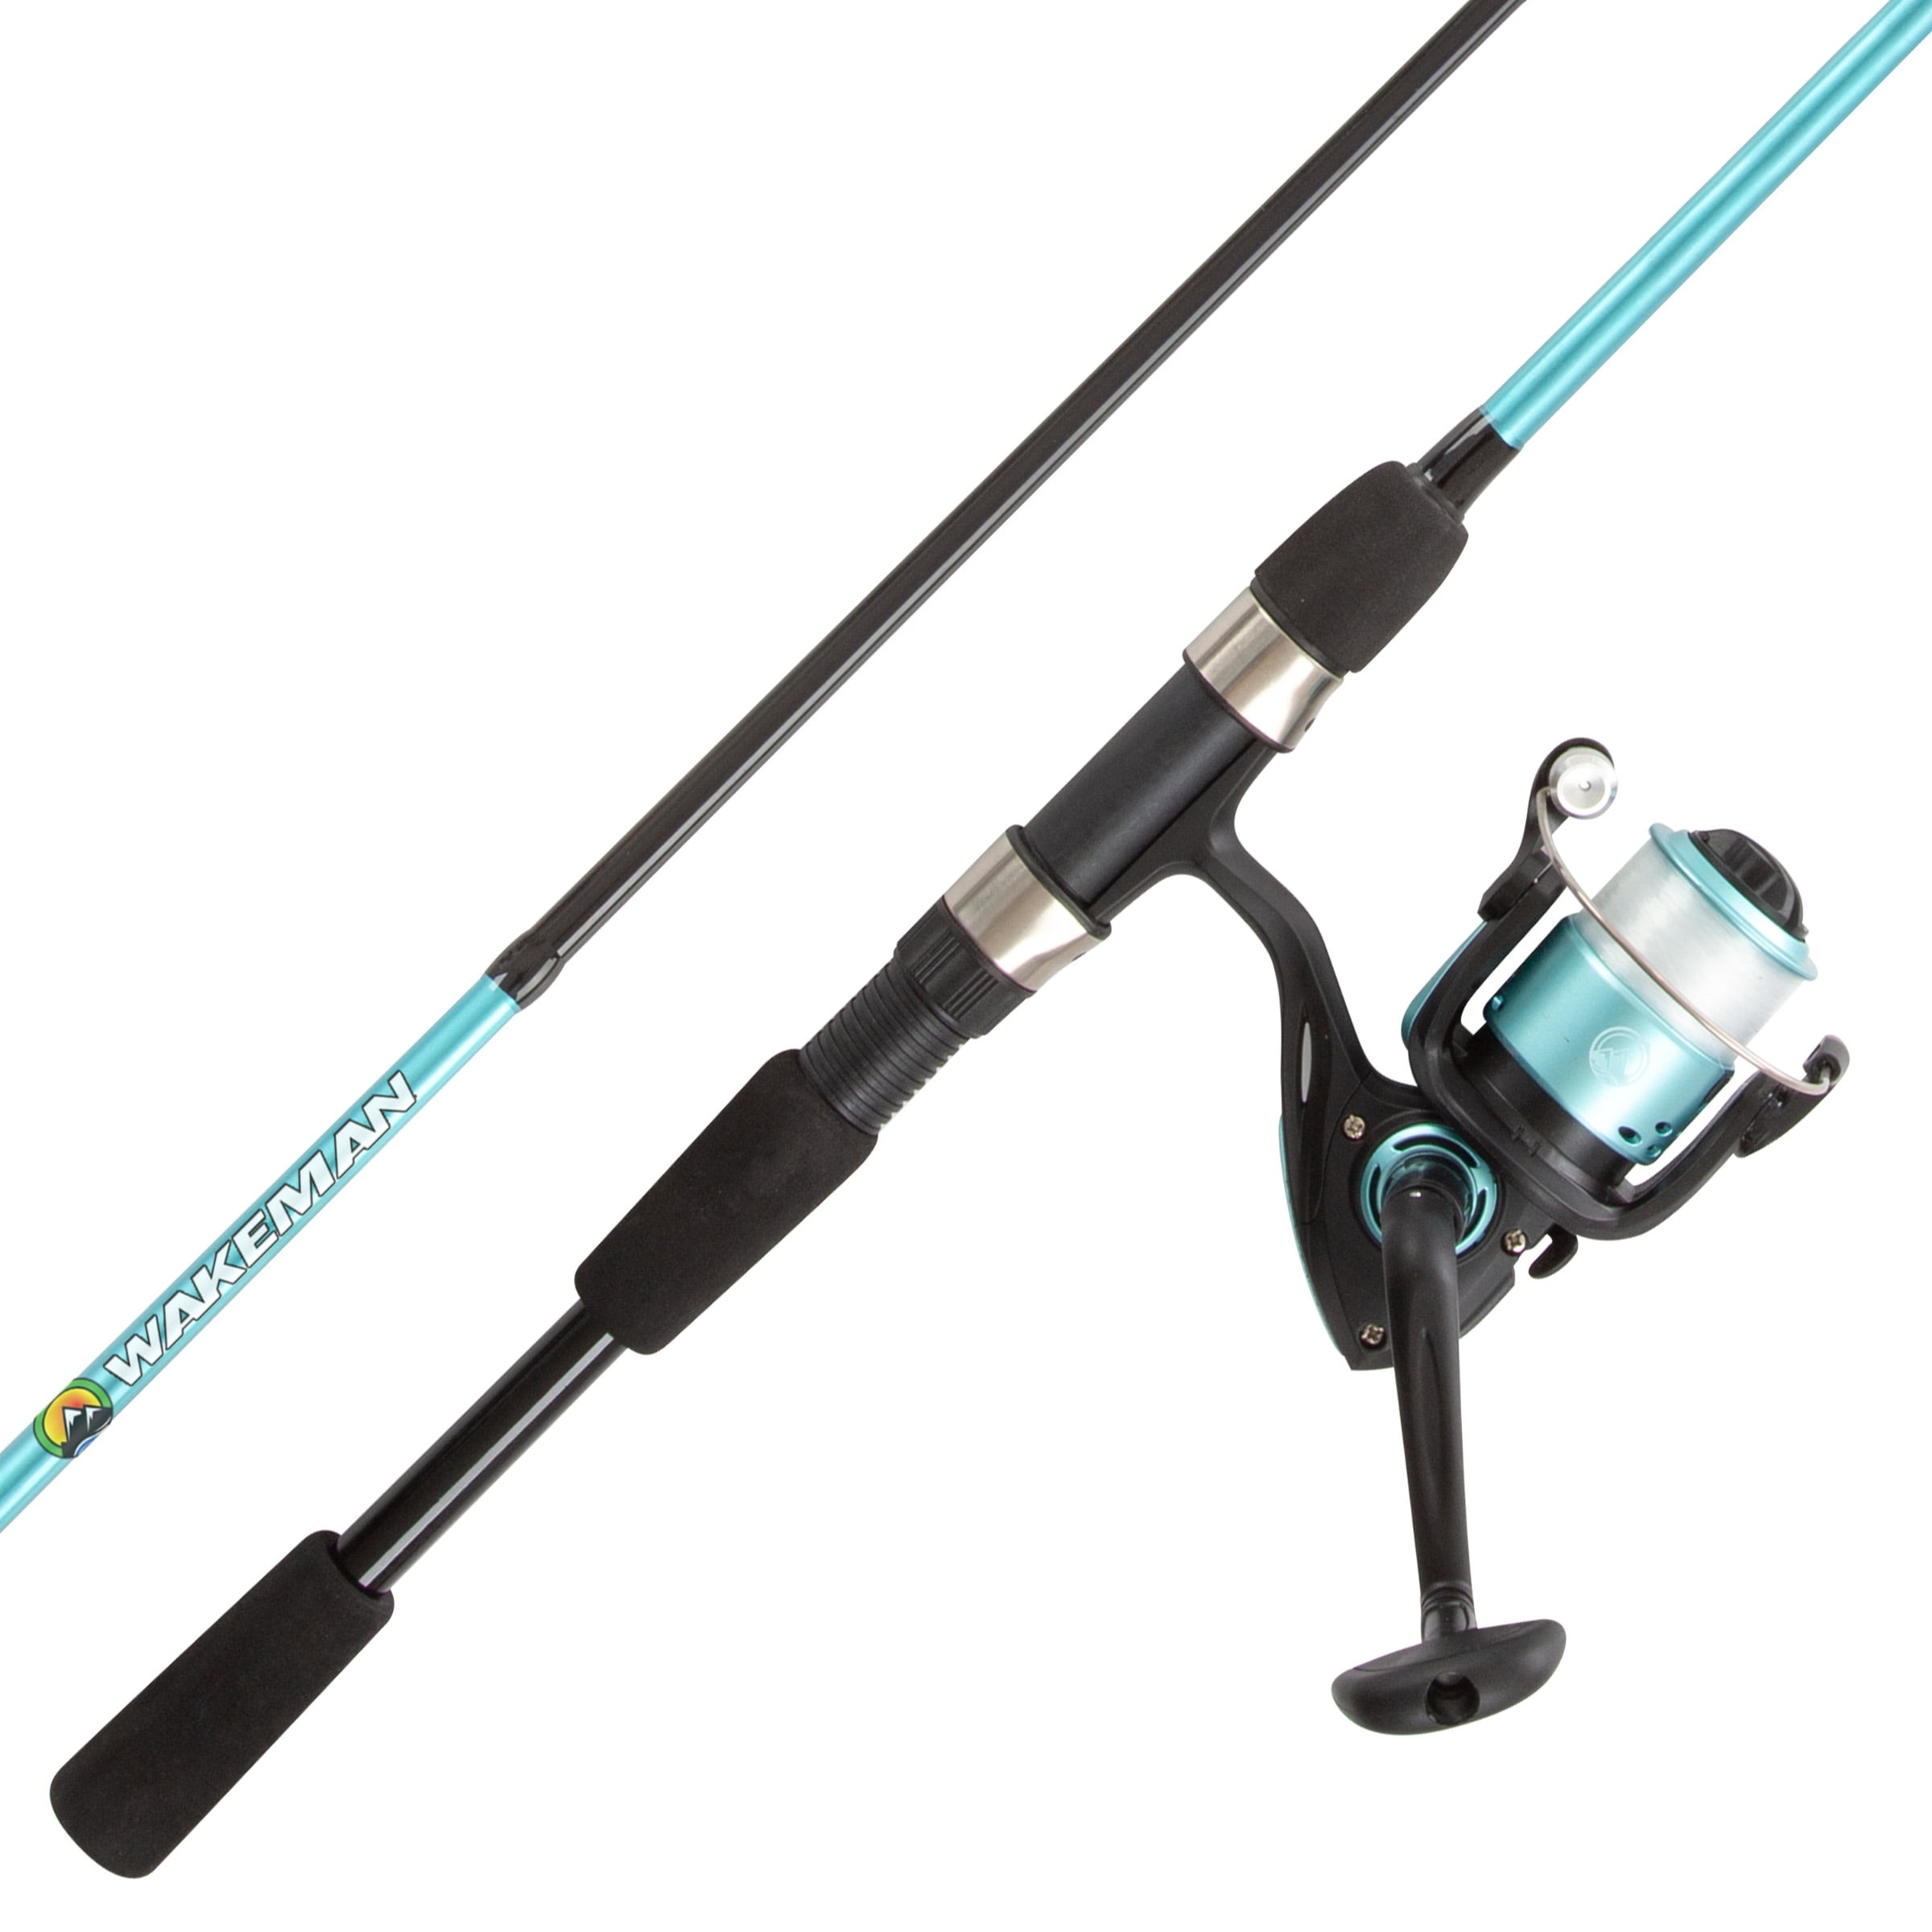 Fishing Rod and Reel Combo - 6-Foot Spin Cast Fiberglass Pole Test Breakline for Beginners by Wakeman (Turquoise)